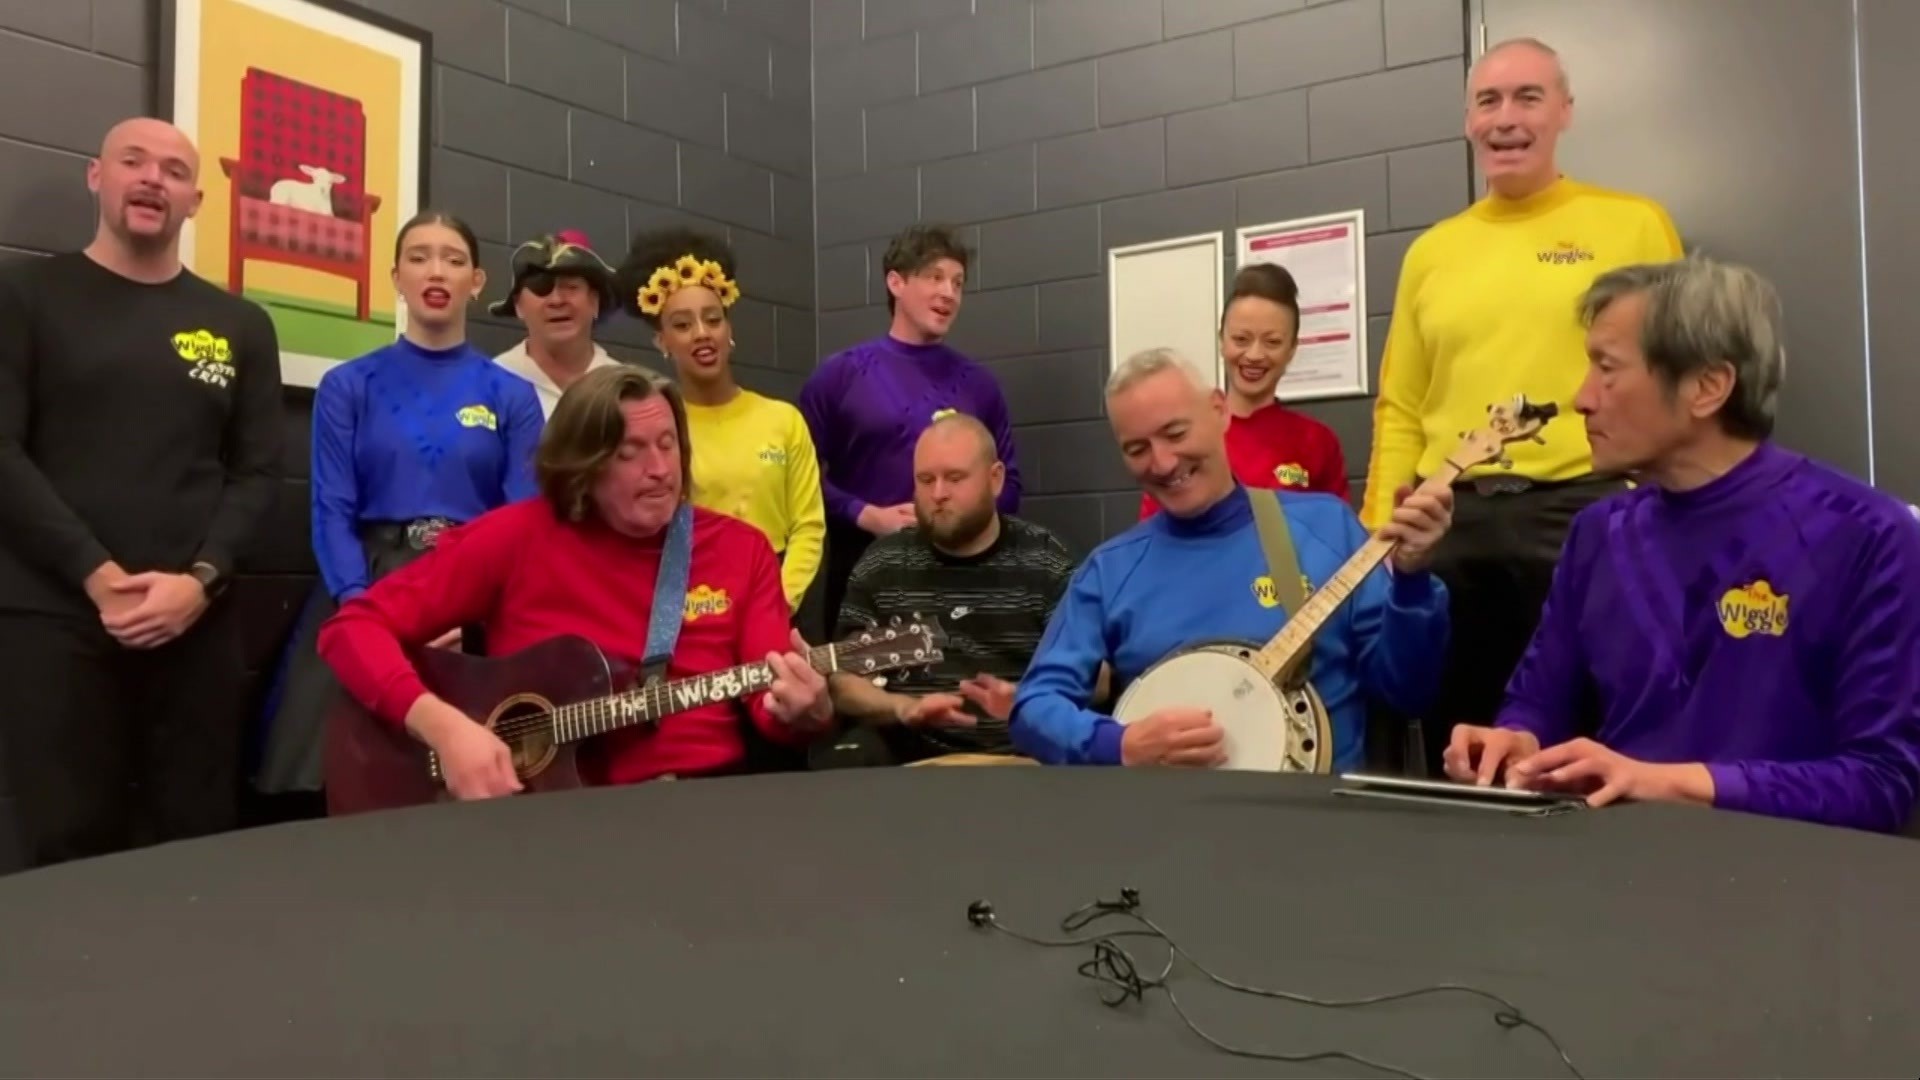 The Wiggles band in colourful skivvies play around a table.